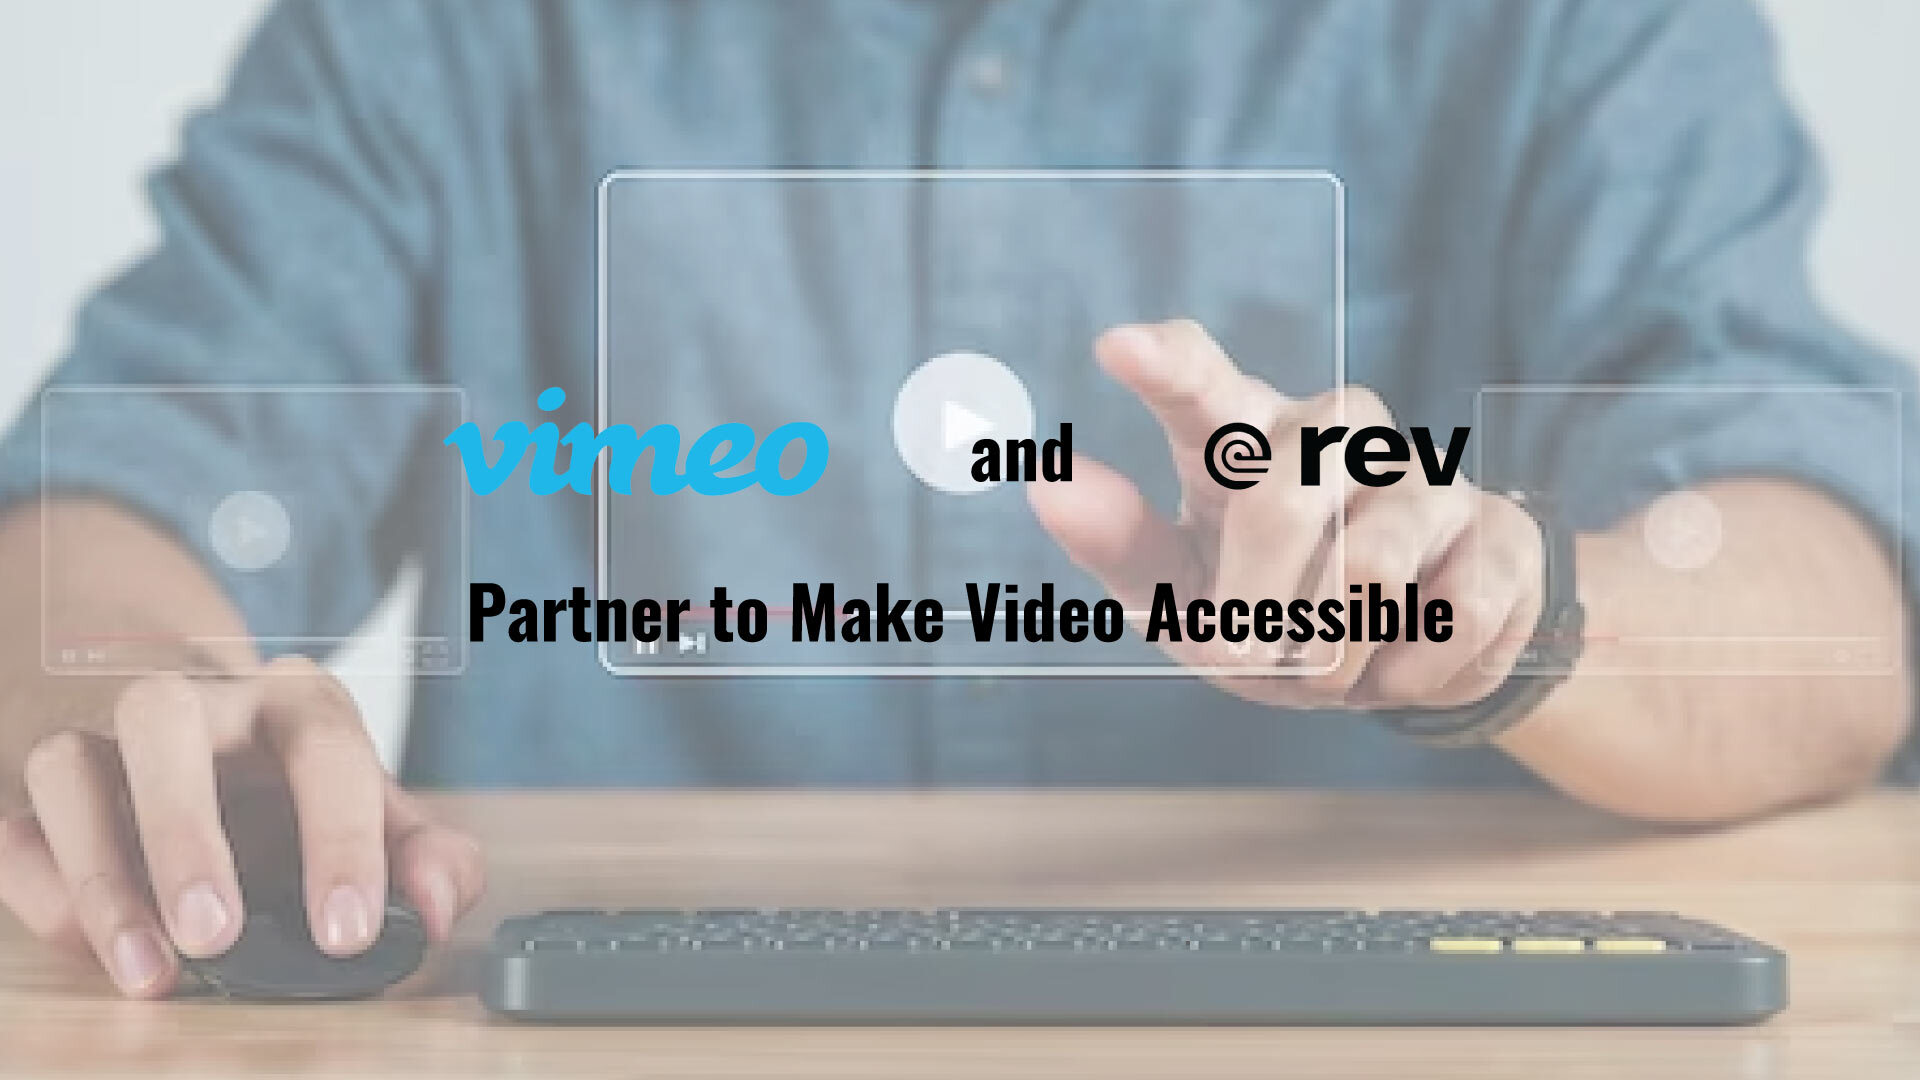 Vimeo and Rev Partner to Make Video Accessible